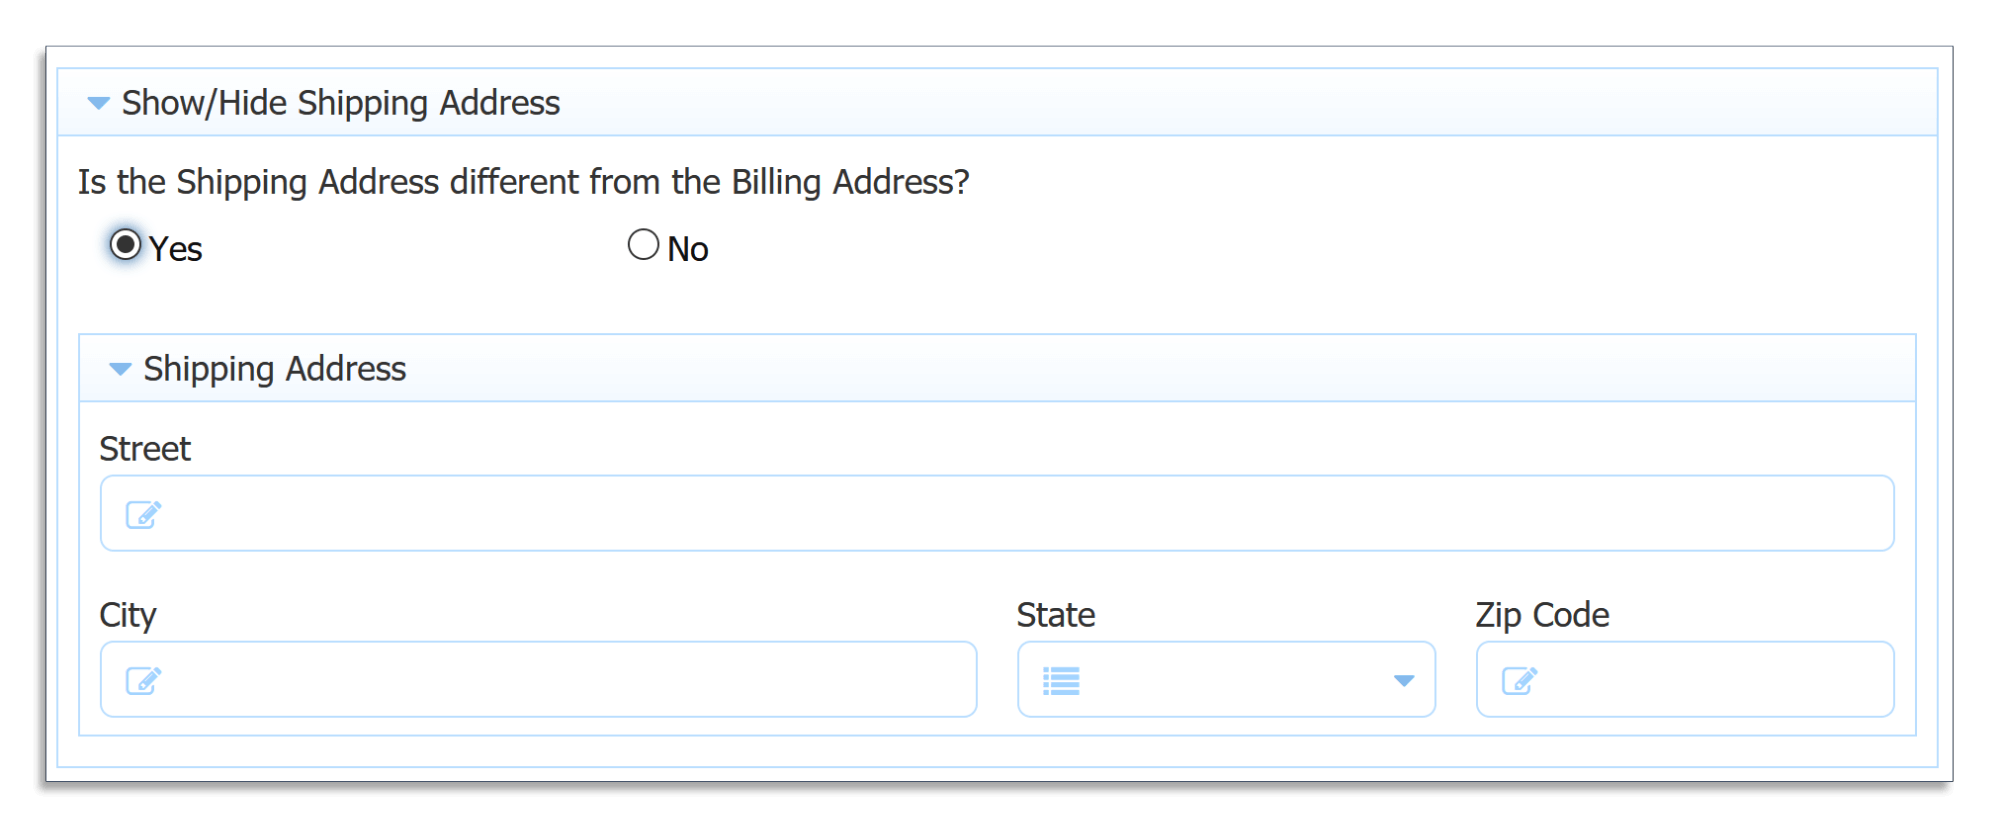 Adding a business rule to show or hide sections on a form